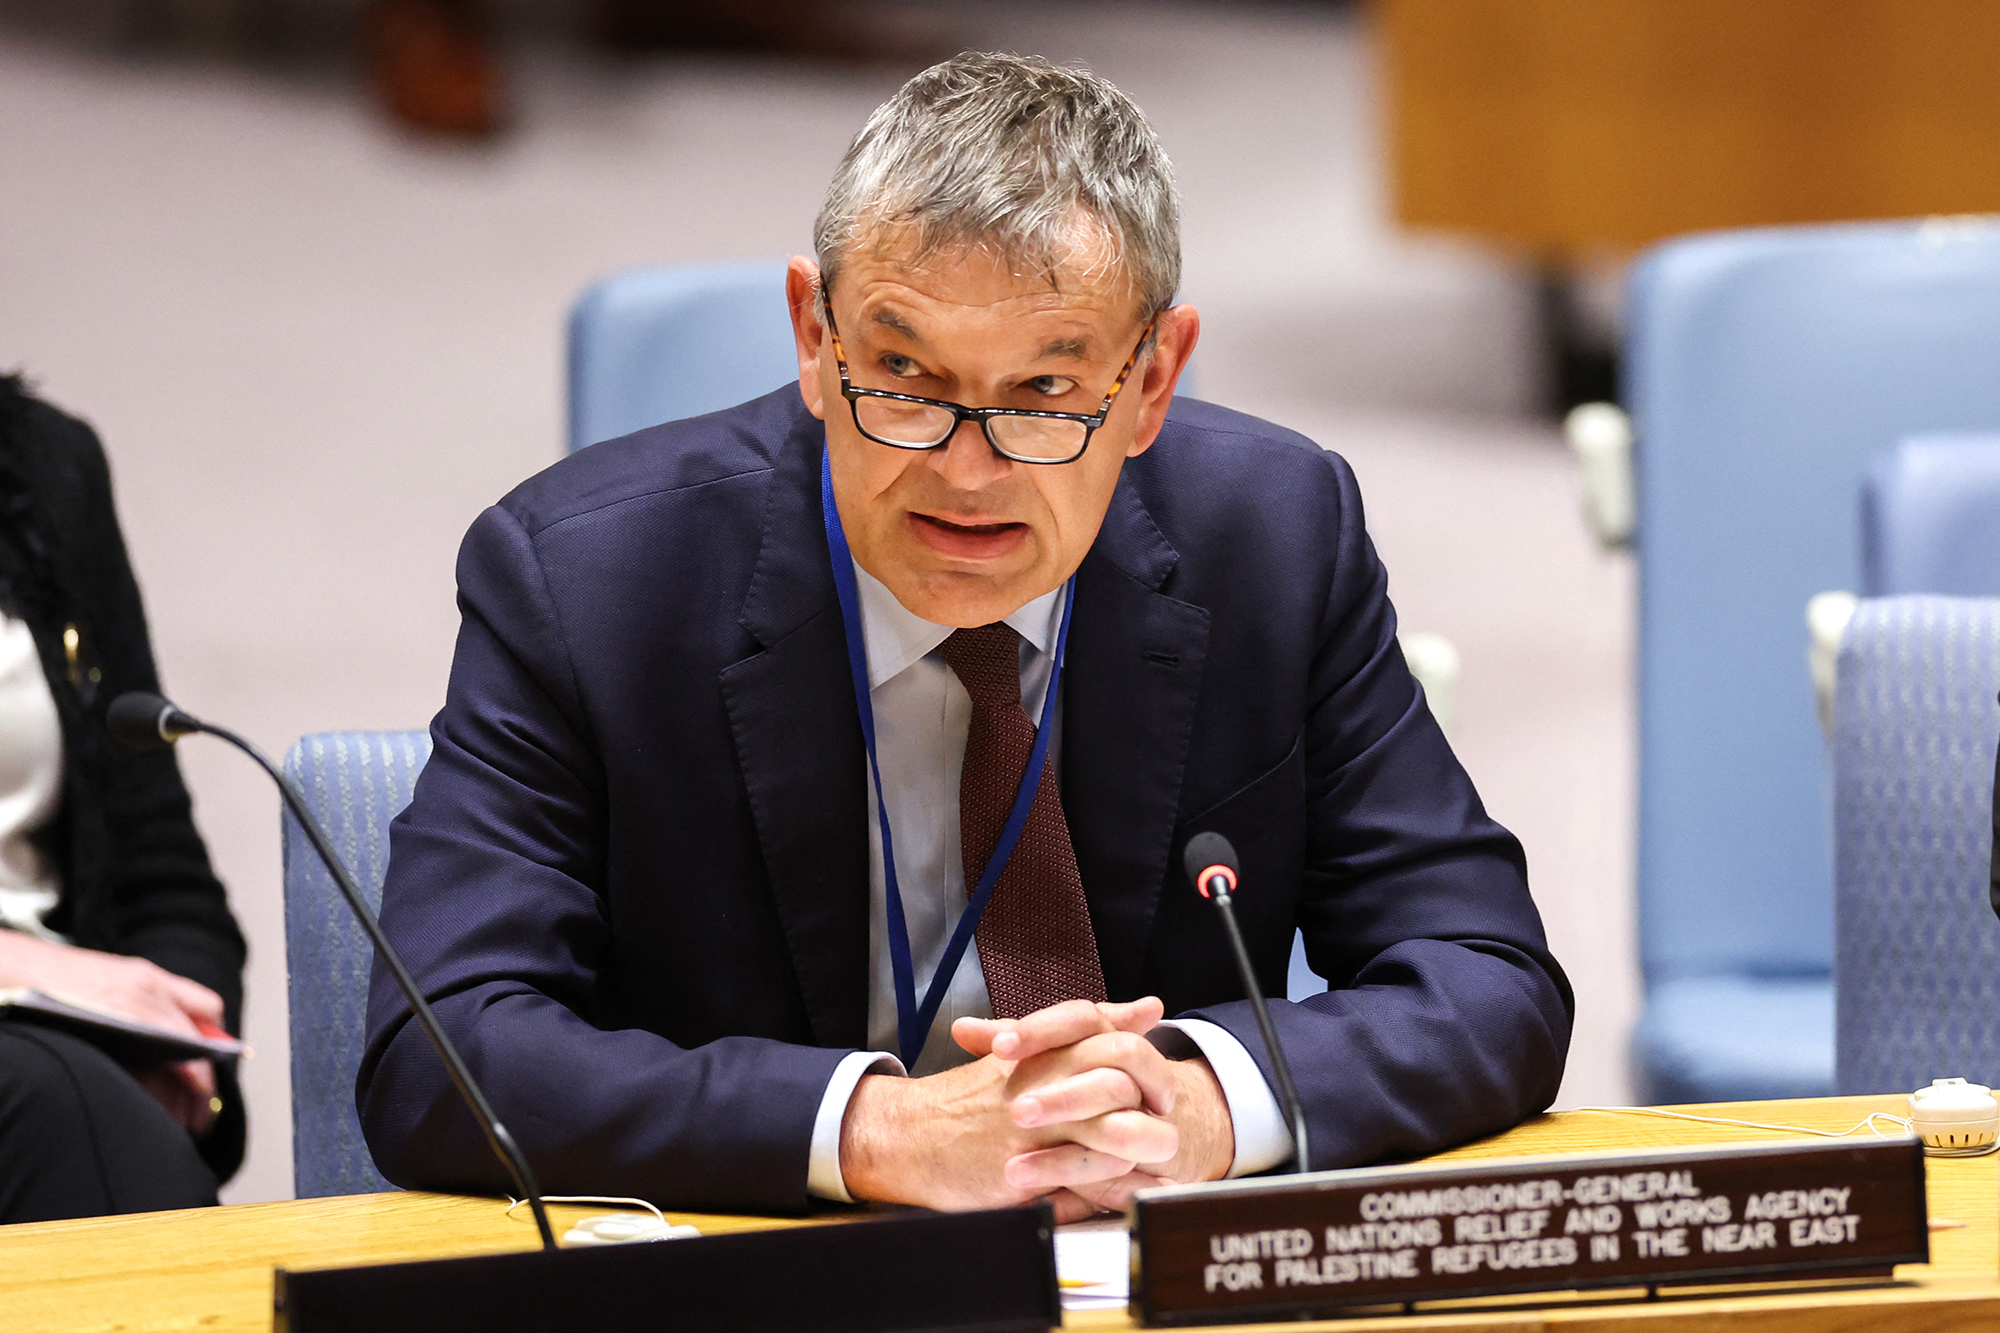 UN Relief and Works Agency (UNRWA) Commissioner General Philippe Lazzarini speaks during a UN Security Council meeting on UNRWA at UN headquarters in New York on April 17.